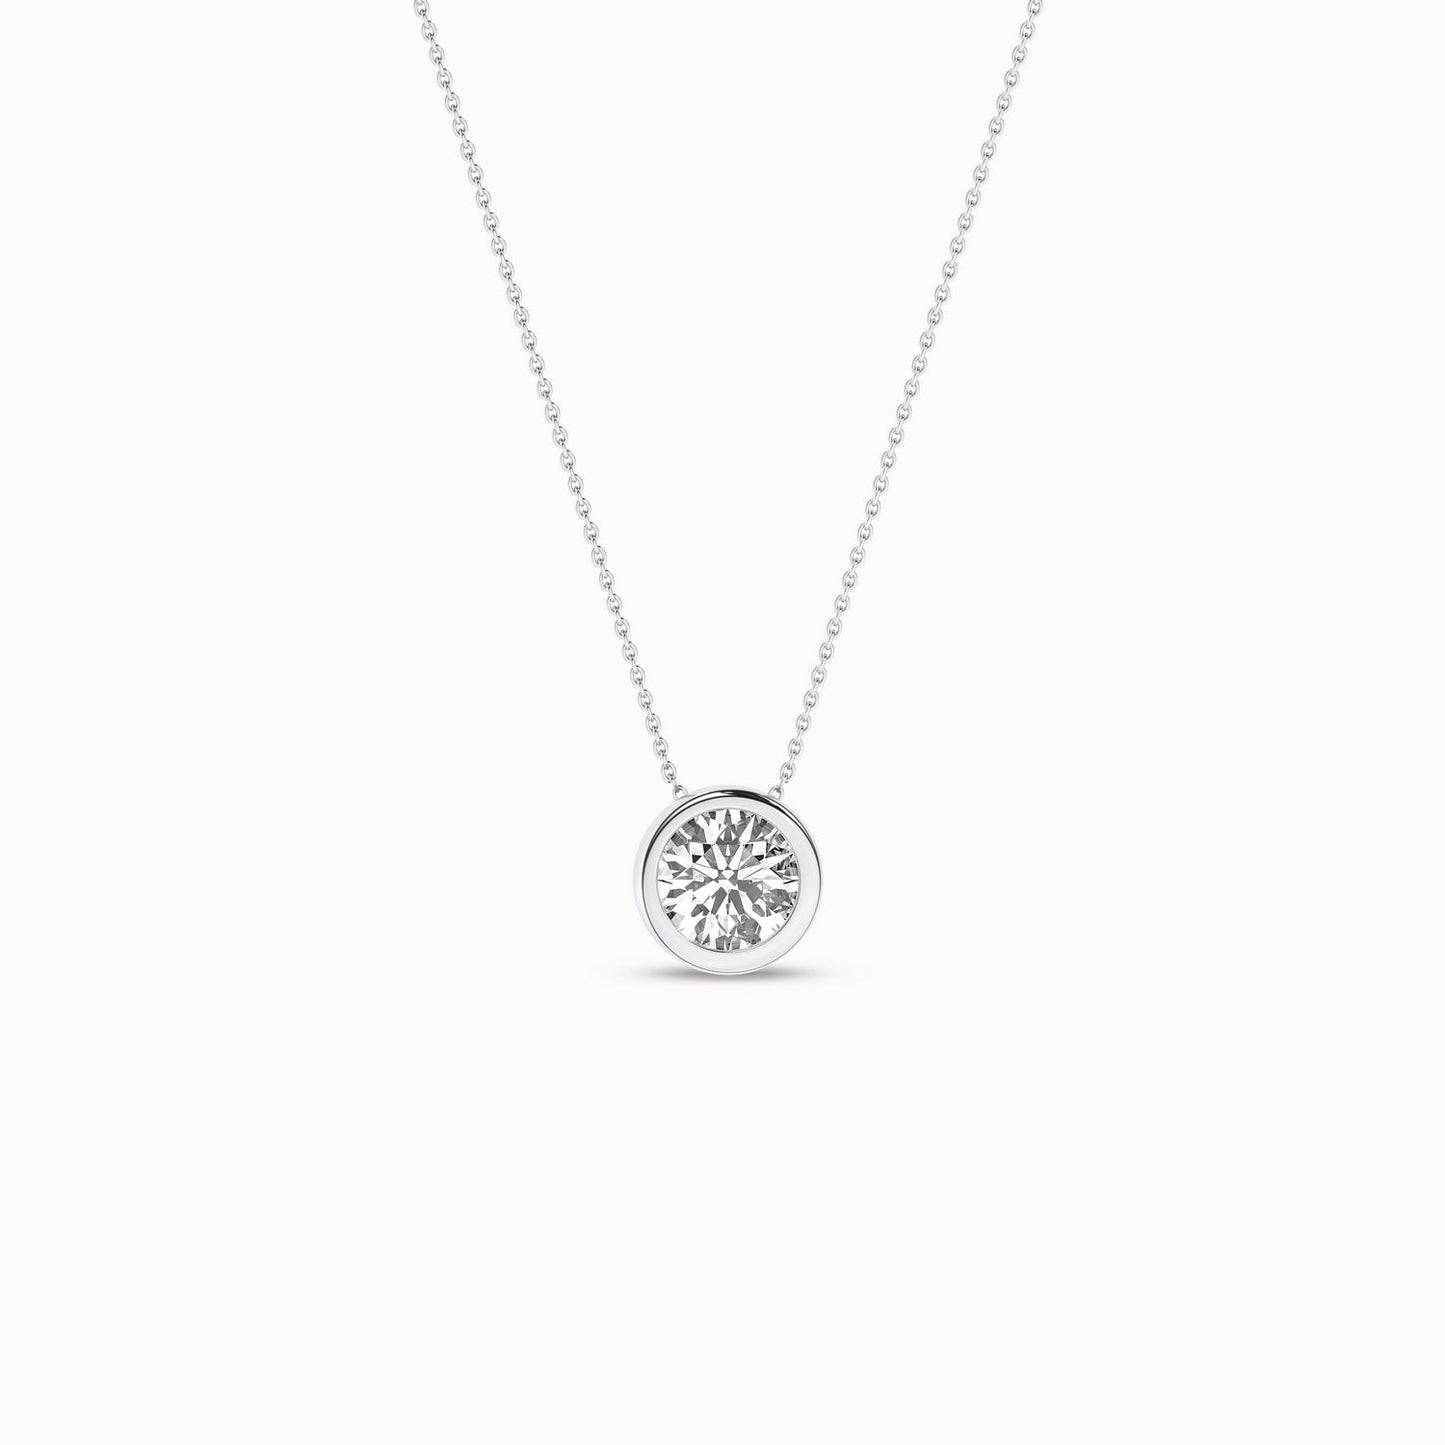 Encompassing Round Necklace_Product Angle_1/2Ct. - 2